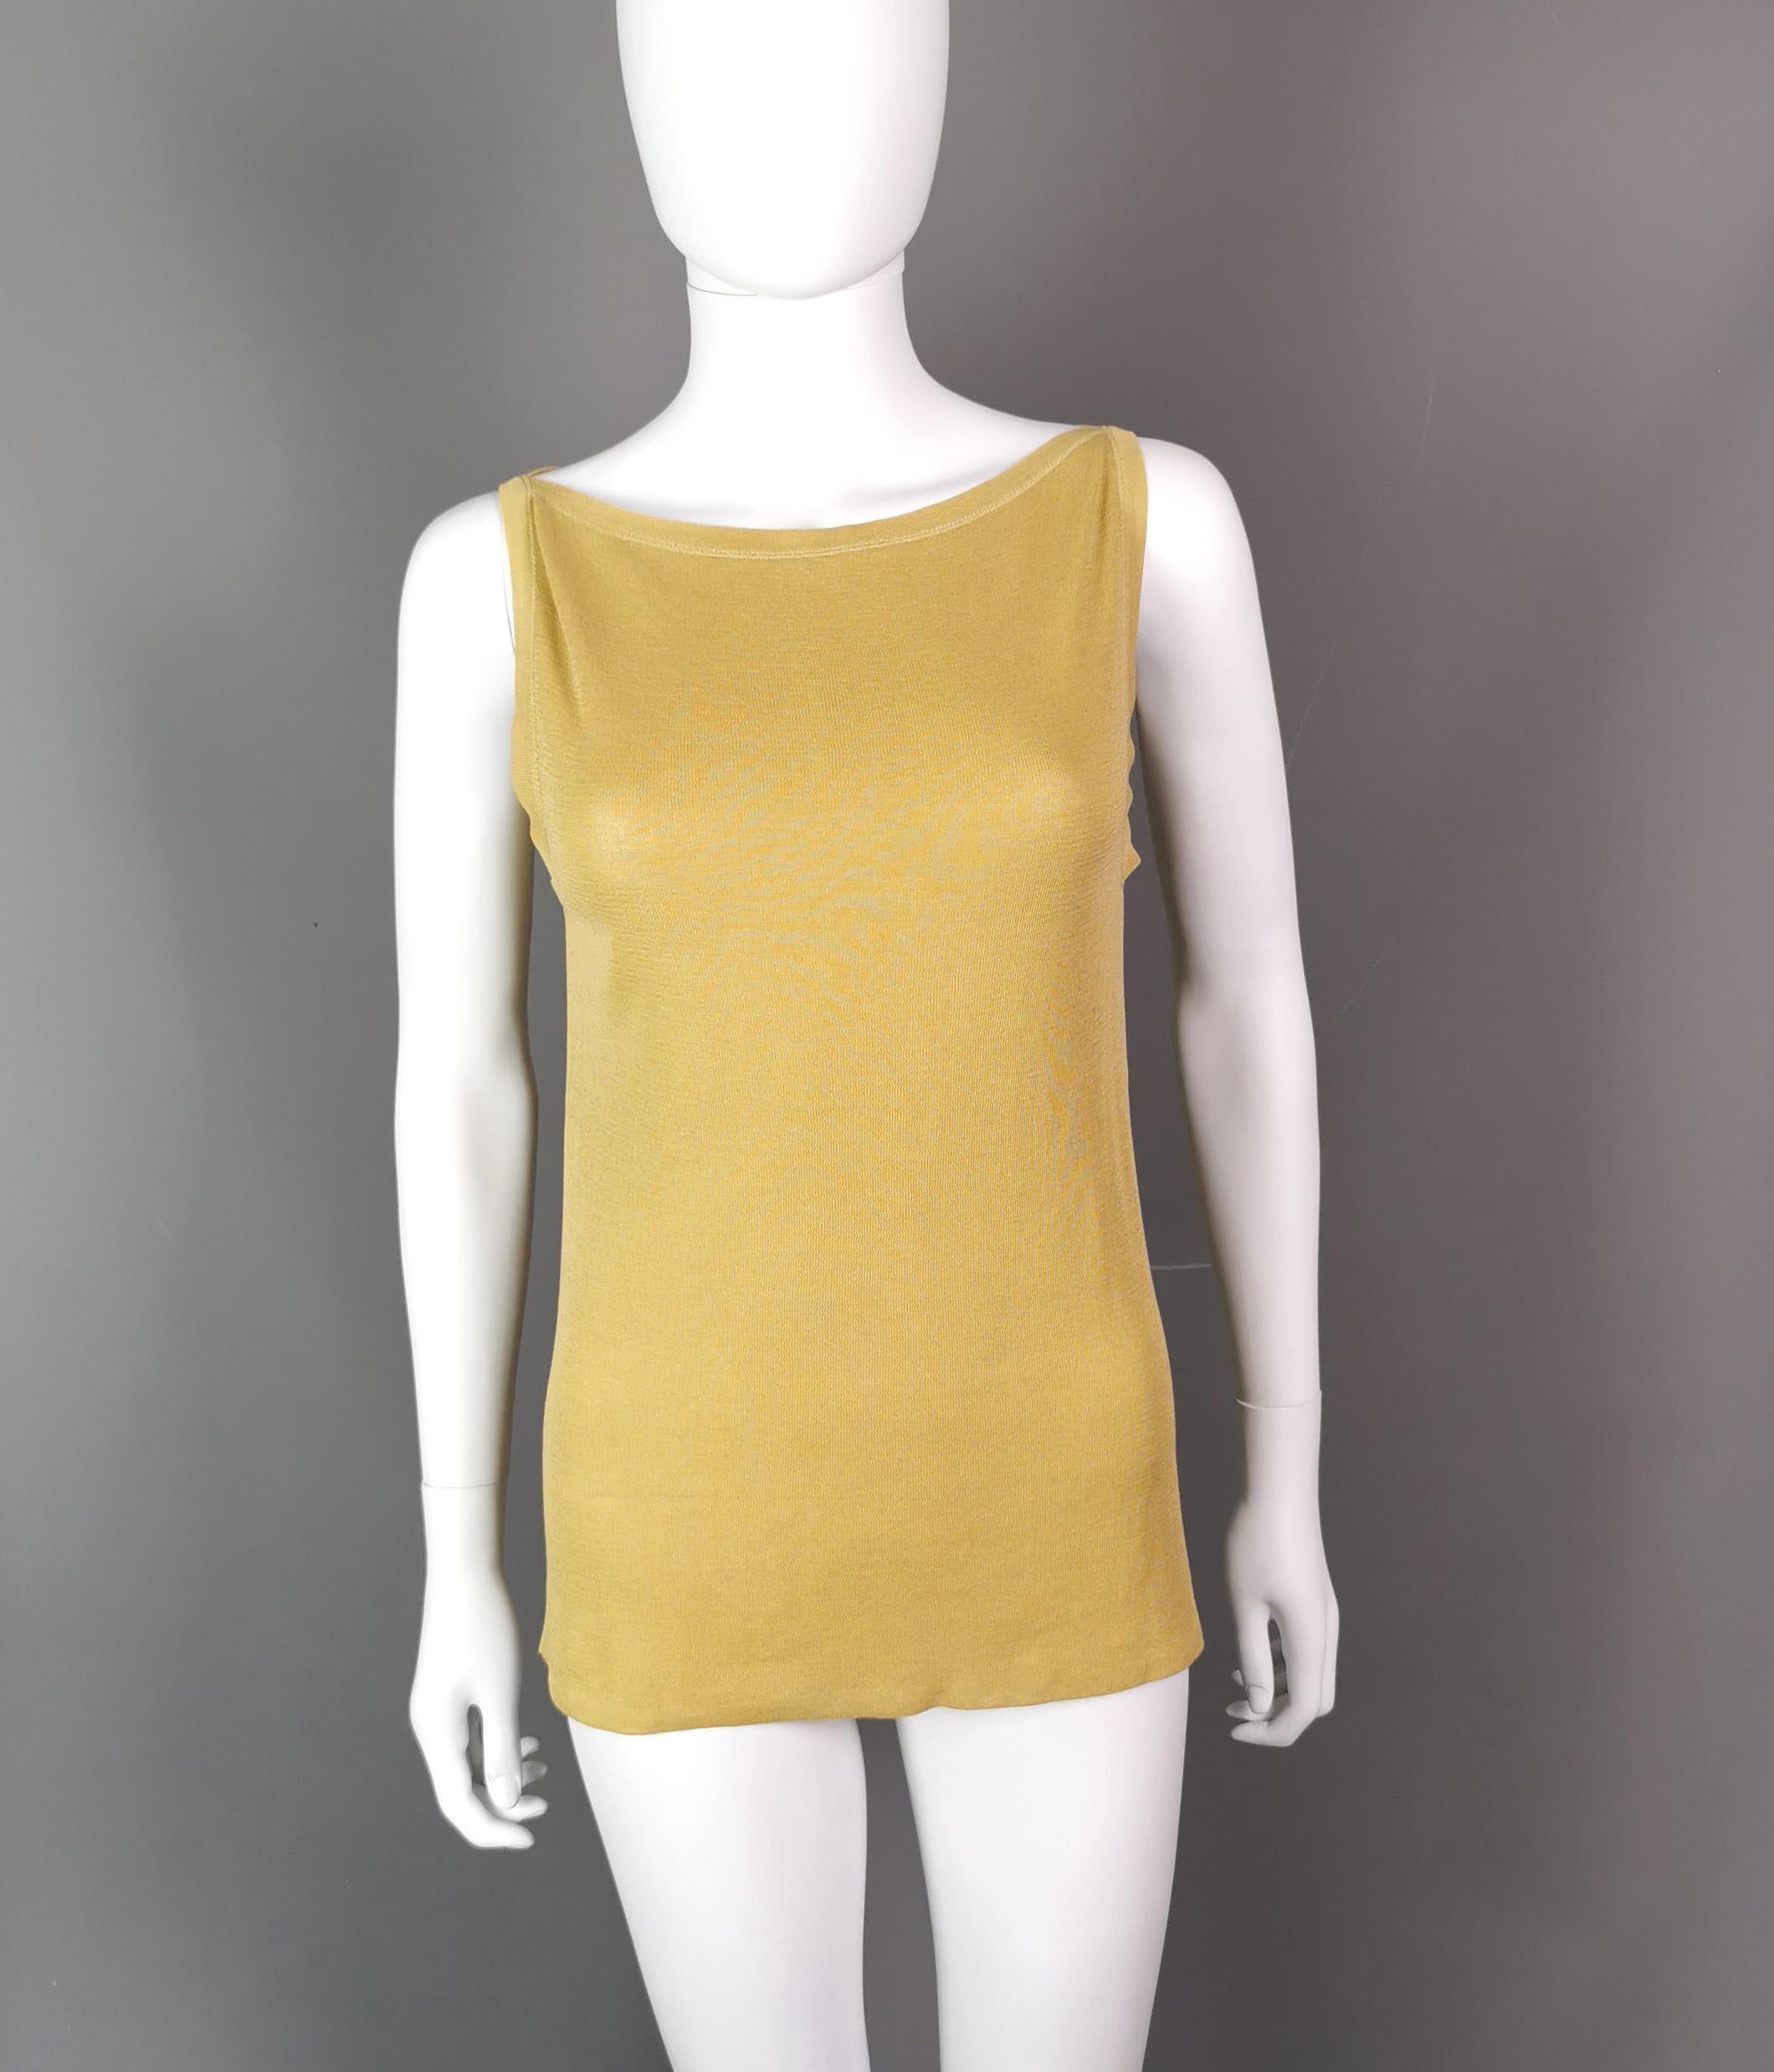 Such a versatile and stylish ladies vintage Gucci tank or vest top.

Made on Italy from 57% silk and 43% cotton it is nice and soft and lightweight.

Could be dressed up or down and it has a split style neckline, sleeveless, mid length.

The top has